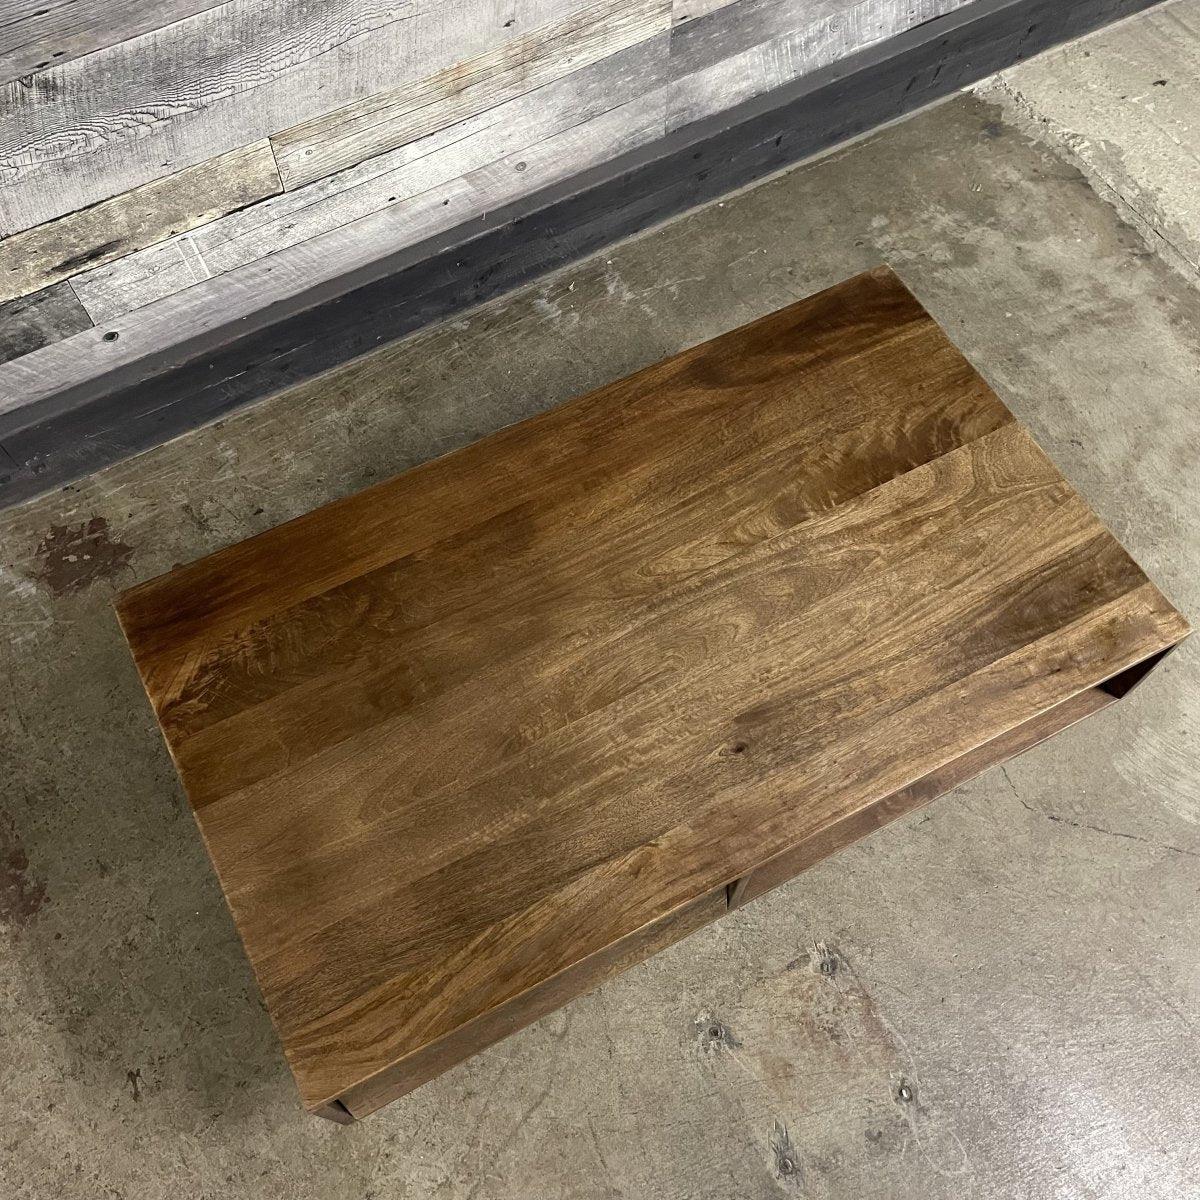 Knox Mango Wood Coffee Table - Rustic Furniture Outlet